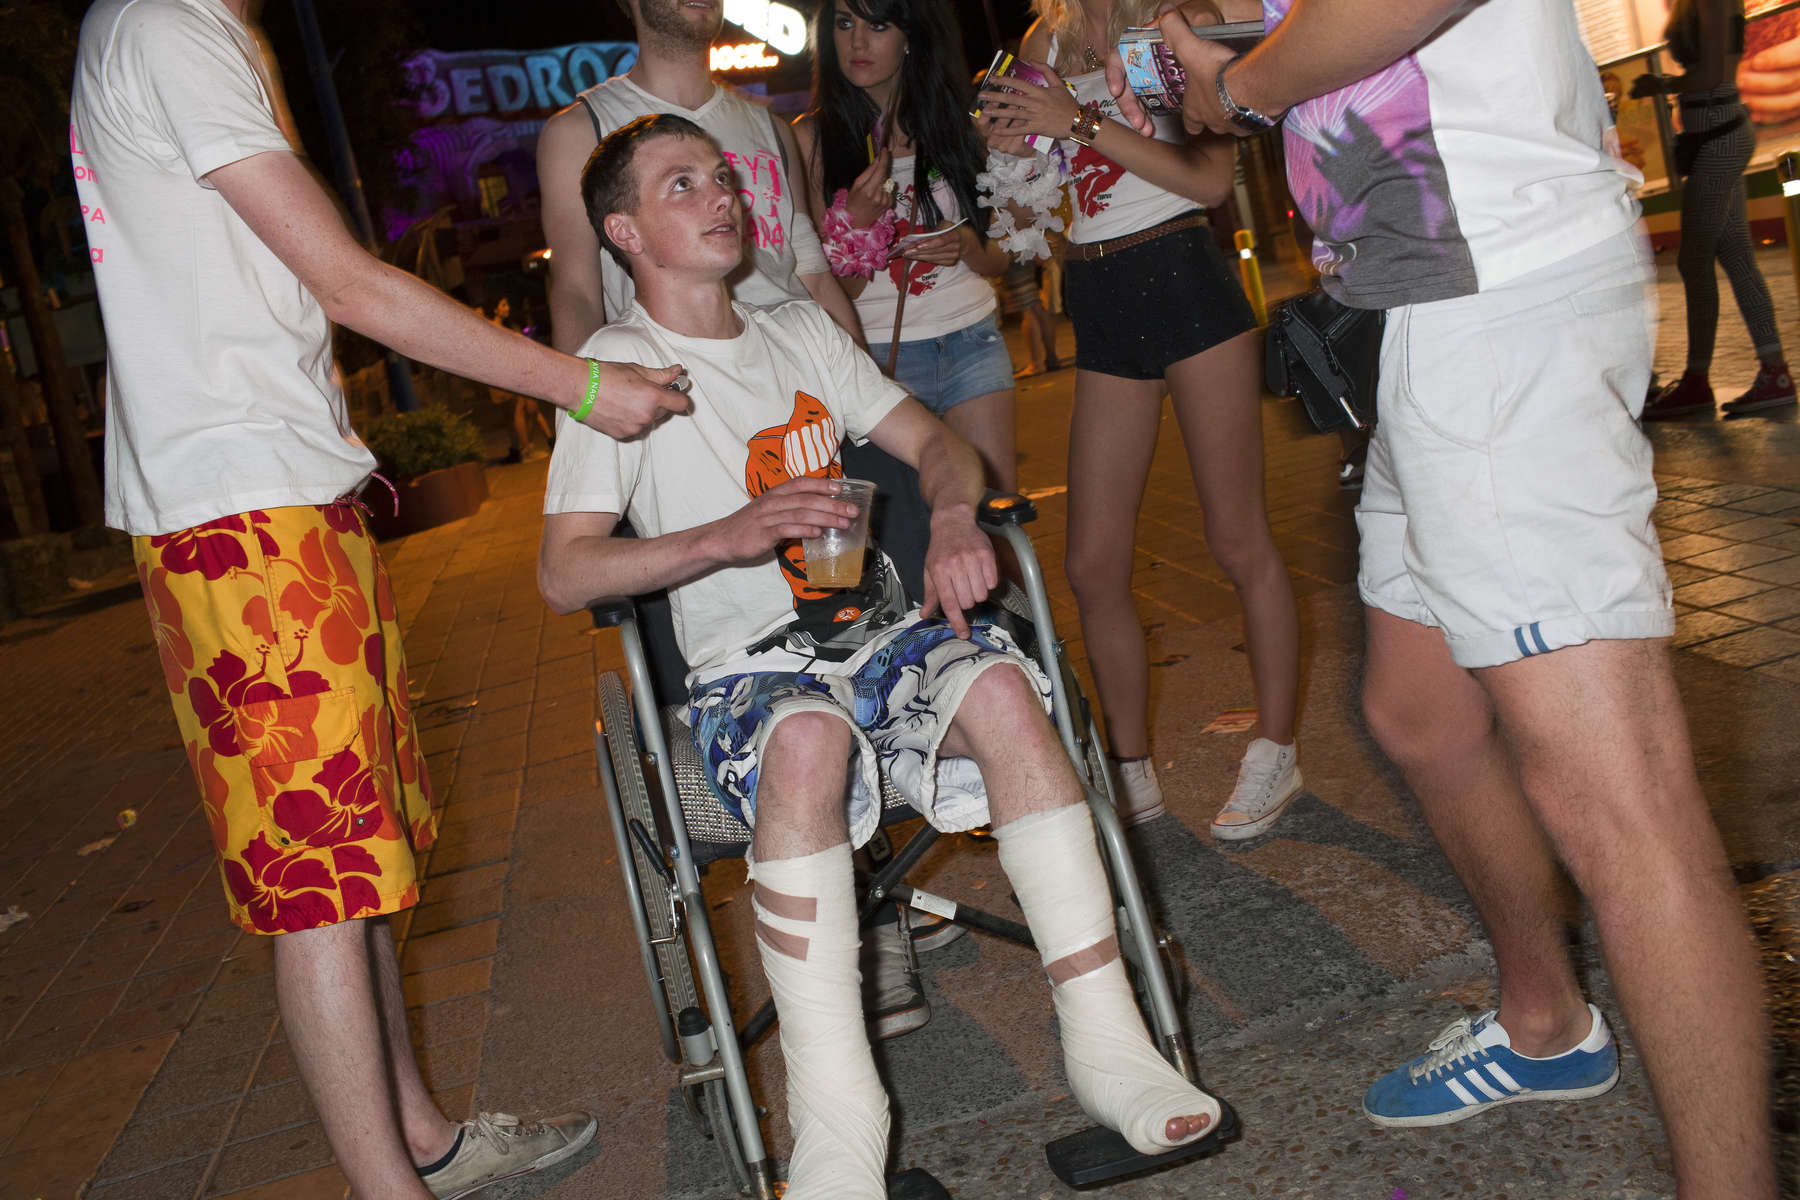 01:51 19 year old Calum, from Scotland, on the strip with friends in Ayia Napa, Cyprus. Calum slipped on the floor where he was staying and fell through a patio door and from a first floor balcony, severing the tendons in both of his legs. Travel operator, Thomas Cook, arranged three seats for him on the aeroplane home as Calum had appropriate travel insurance.